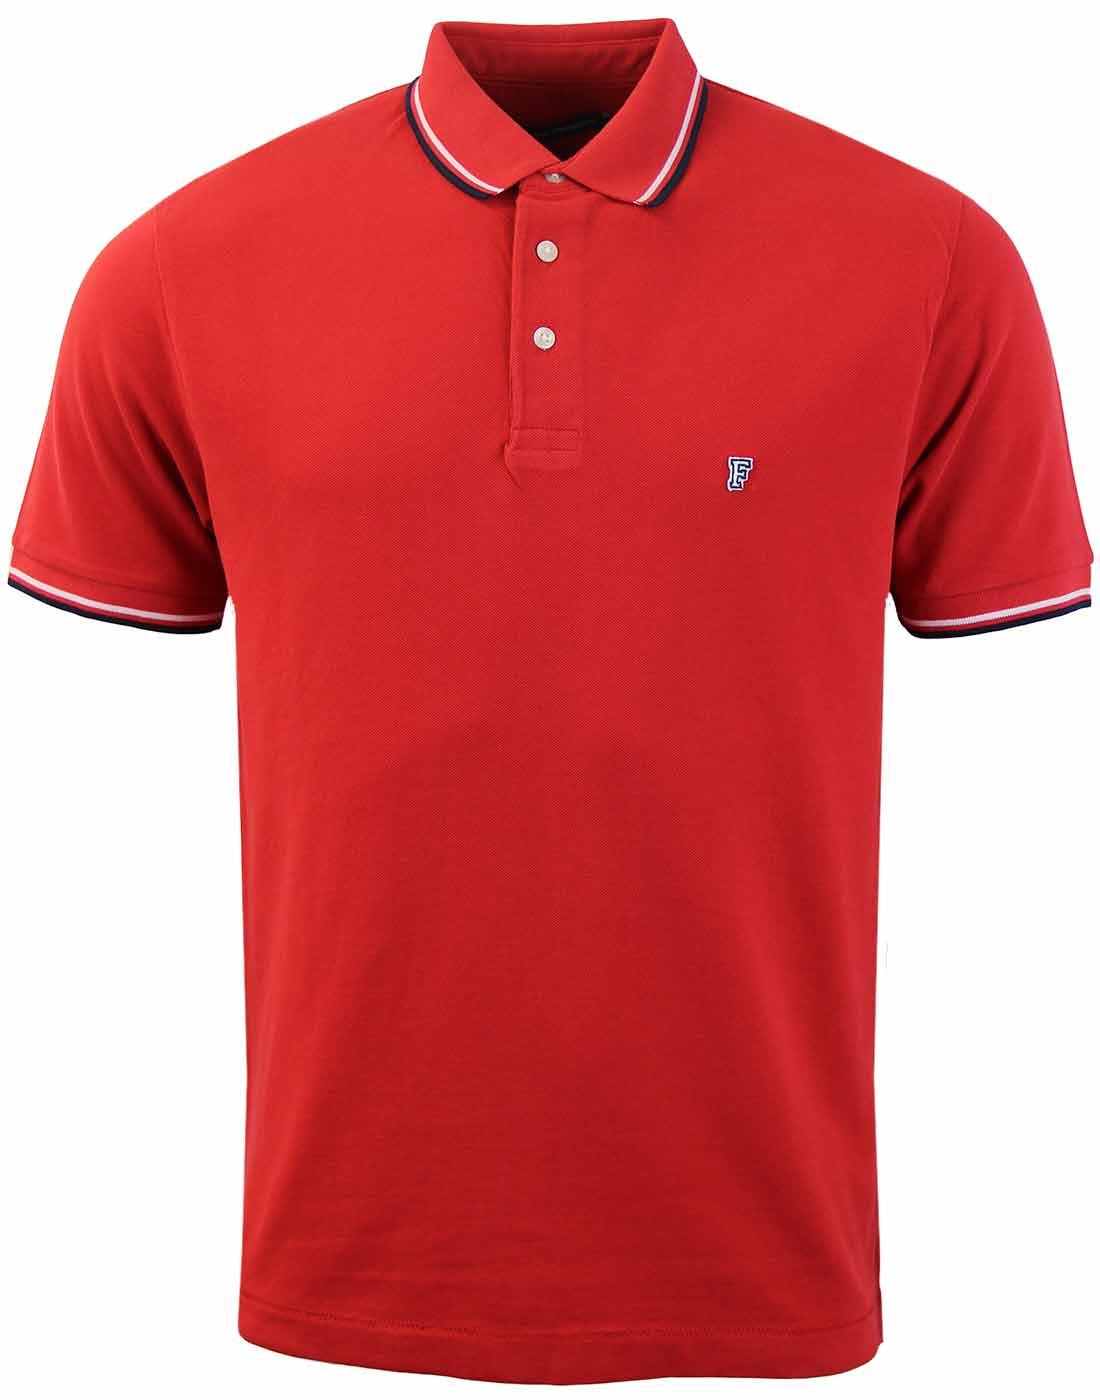 FRENCH CONNECTION Retro Mod Tipped Polo Shirt in Red